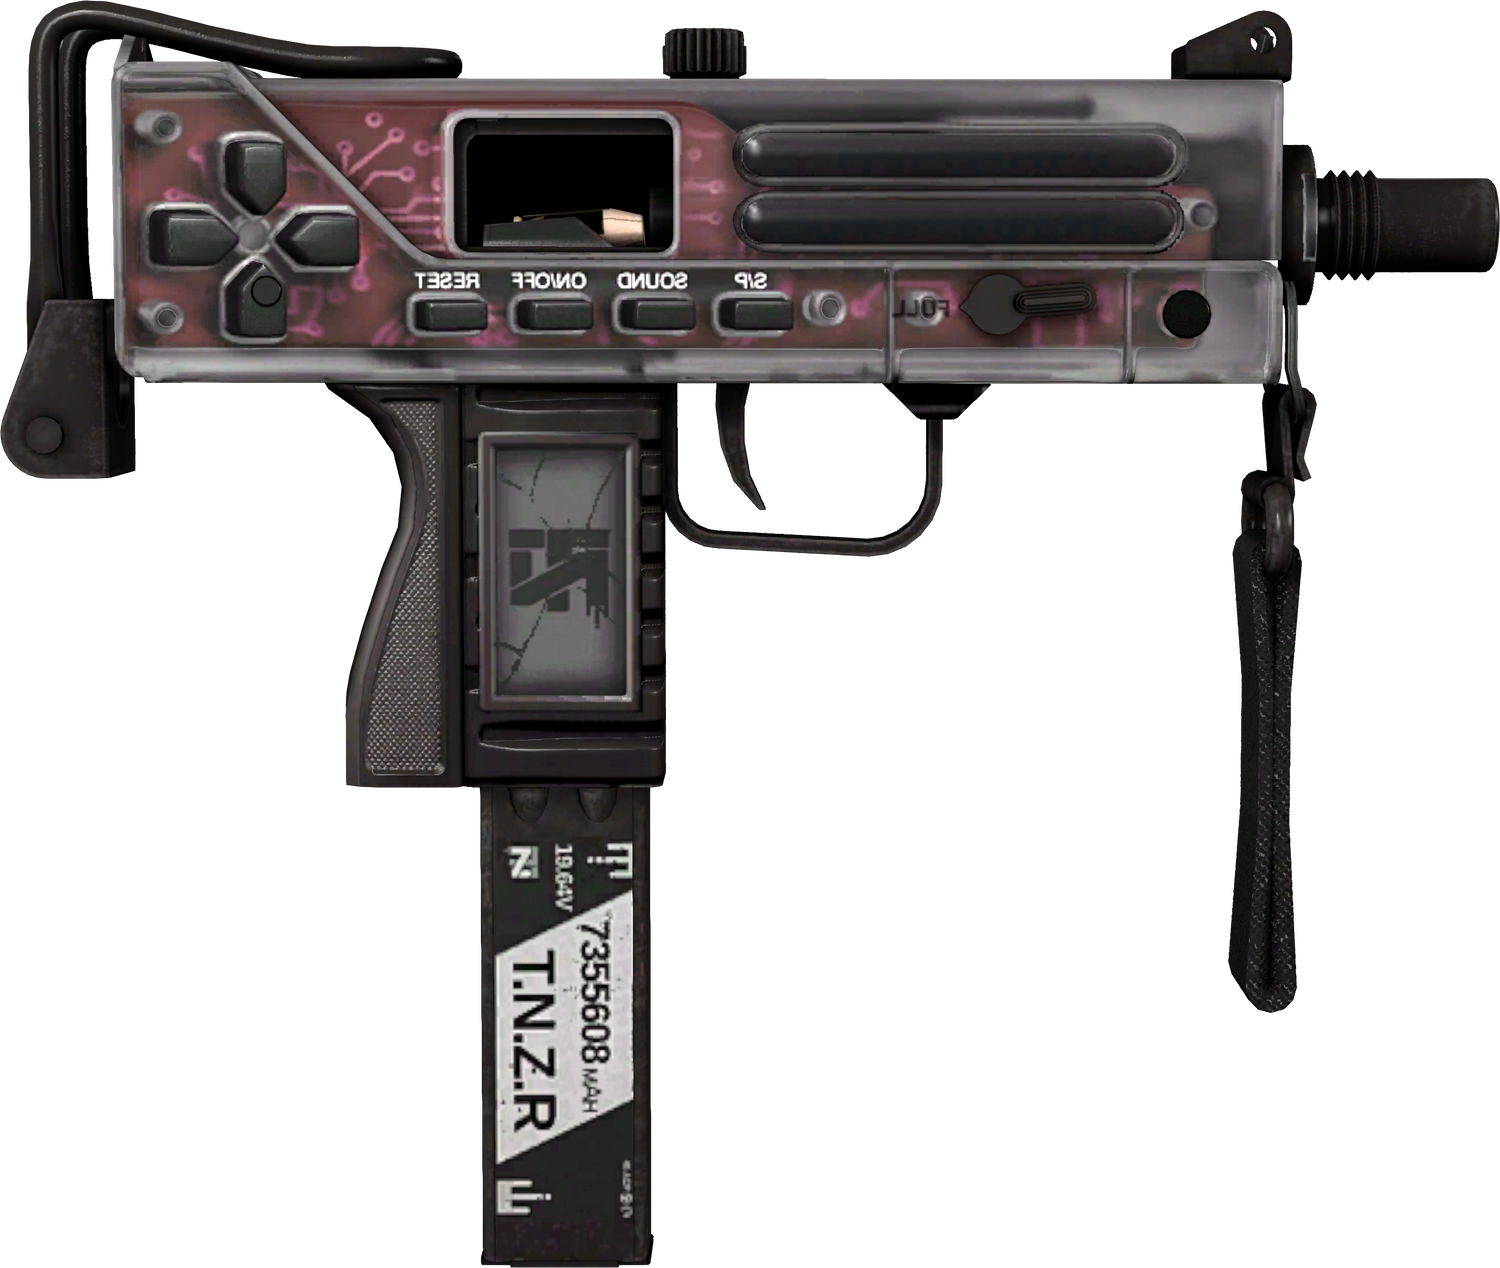 MAC-10 Button Masher cs go skin download the new version for android